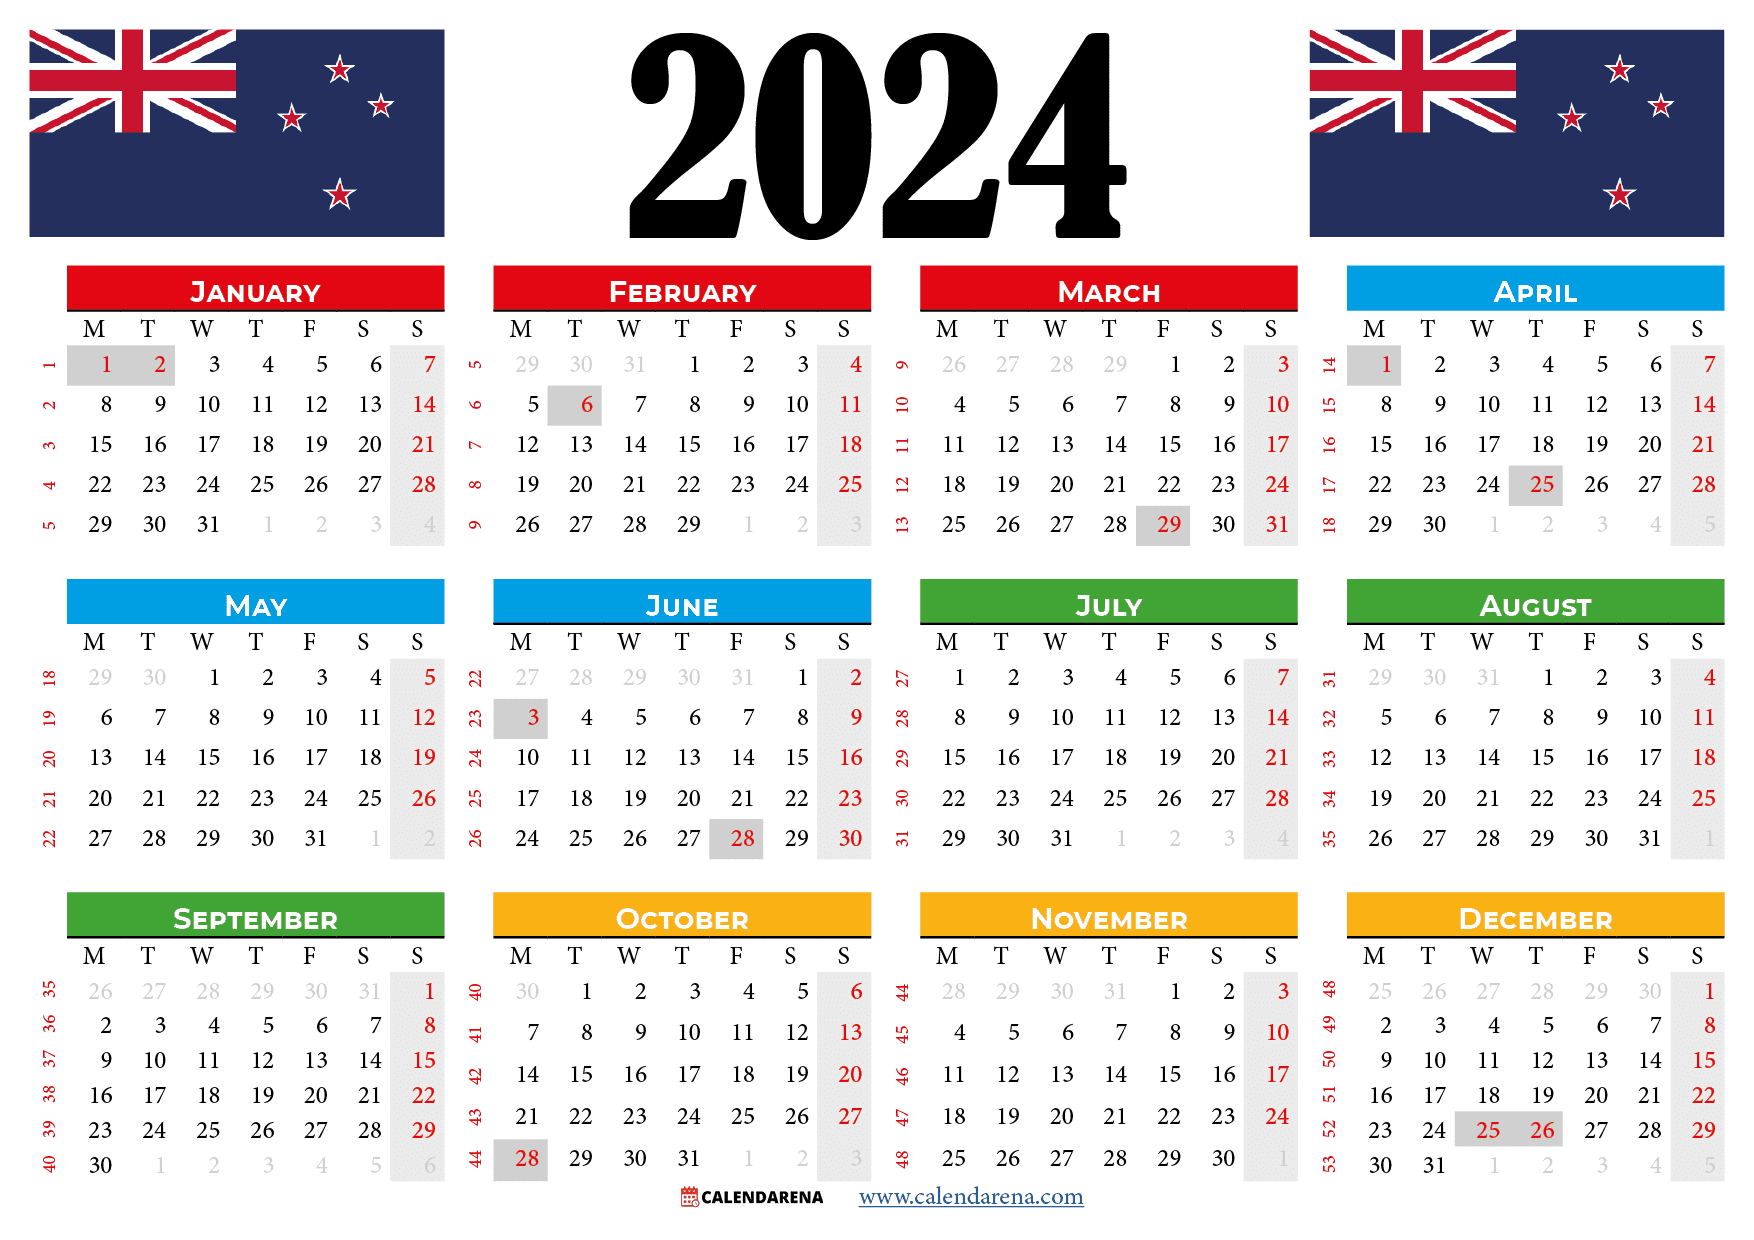 Calendar 2024 Nz With Holidays And Festivals for Free Printable Calendar 2024 Nz With Public Holidays